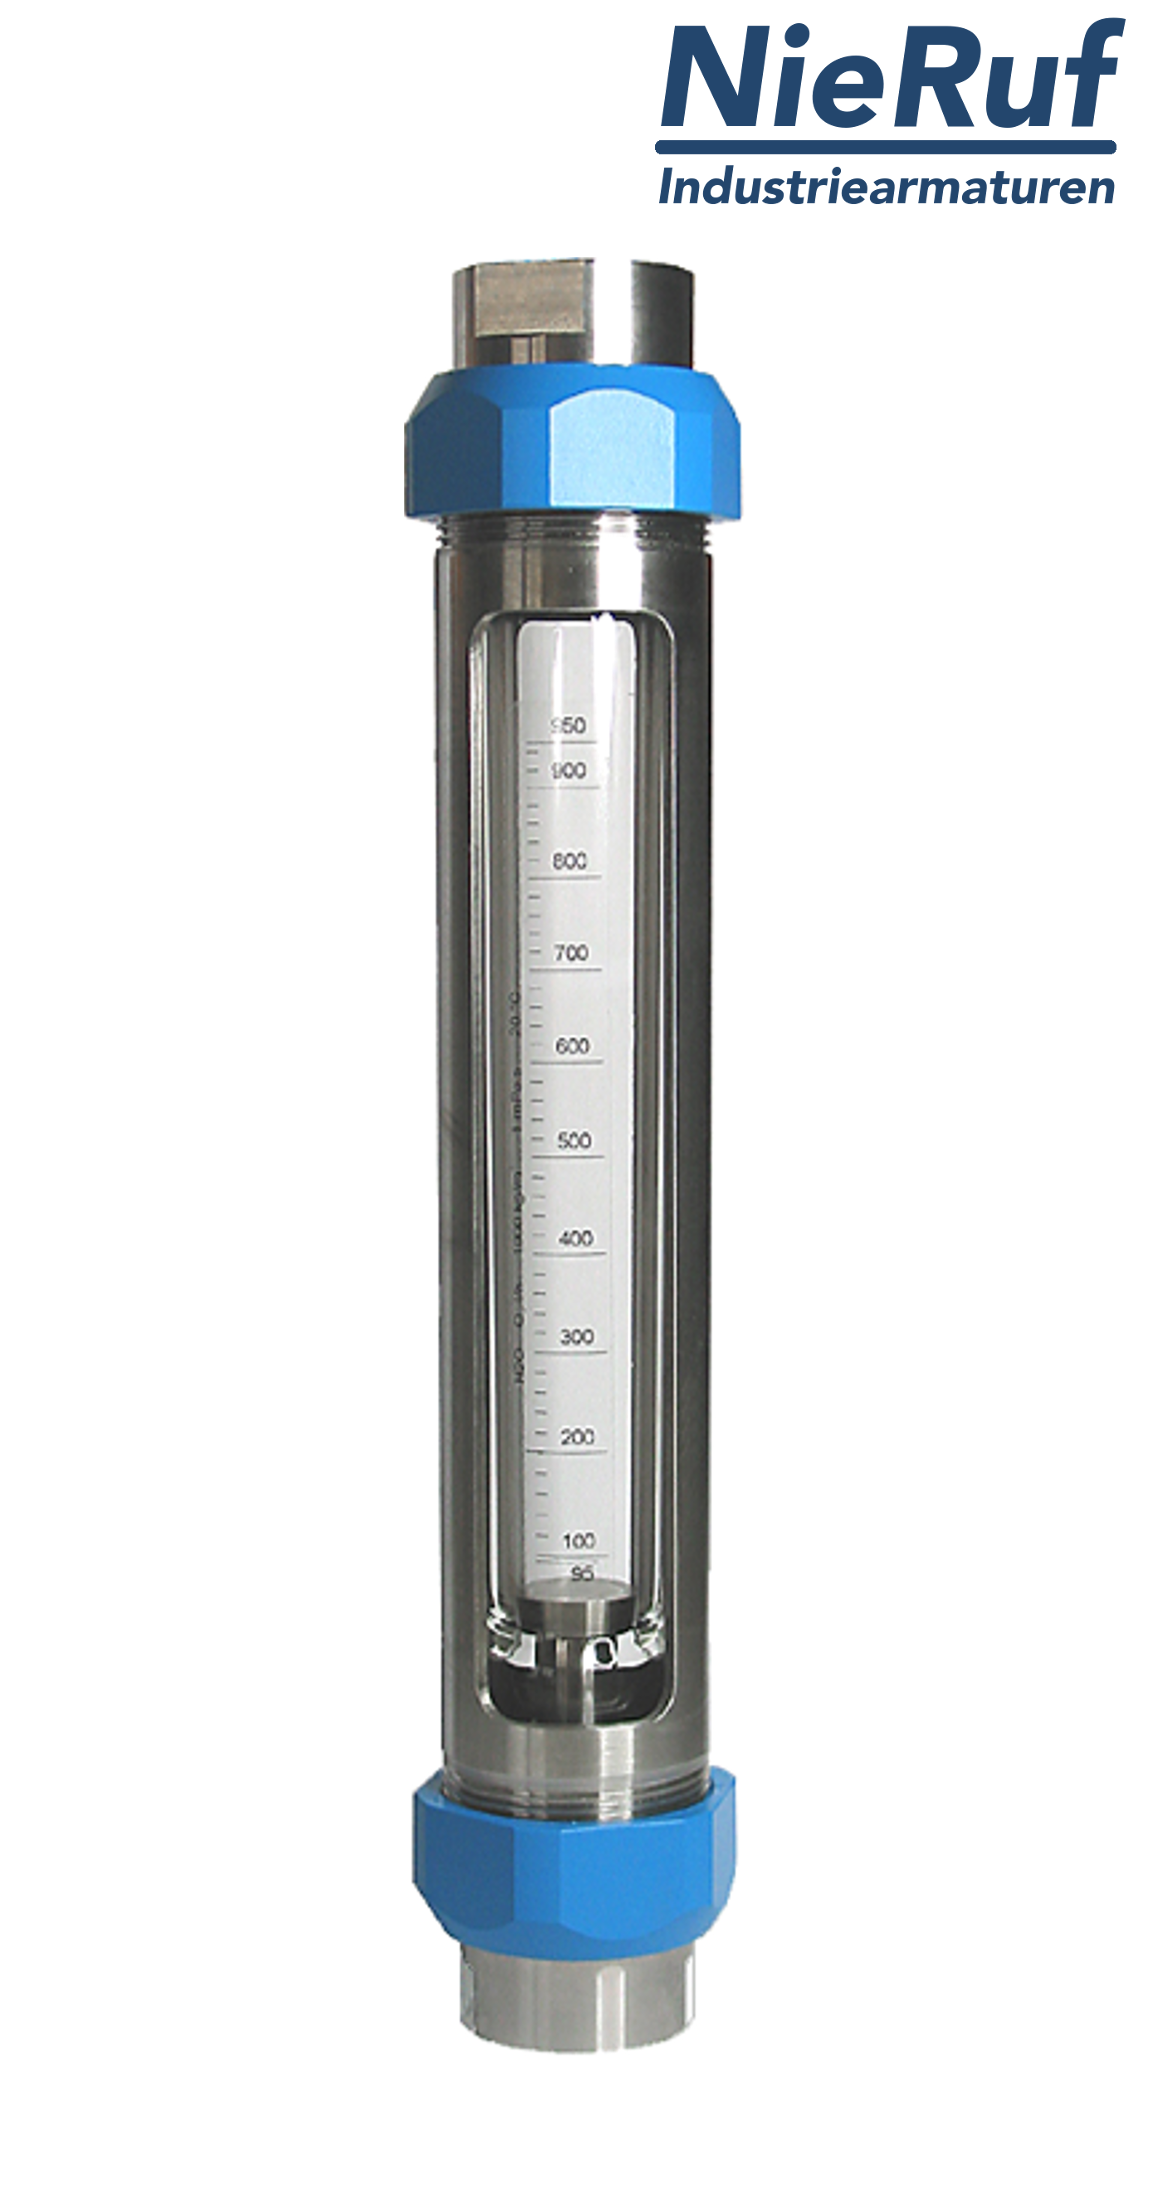 Variable area flowmeter stainless steel + borosilicate 1 1/2" inch 650.0 - 6500 l/h water FKM